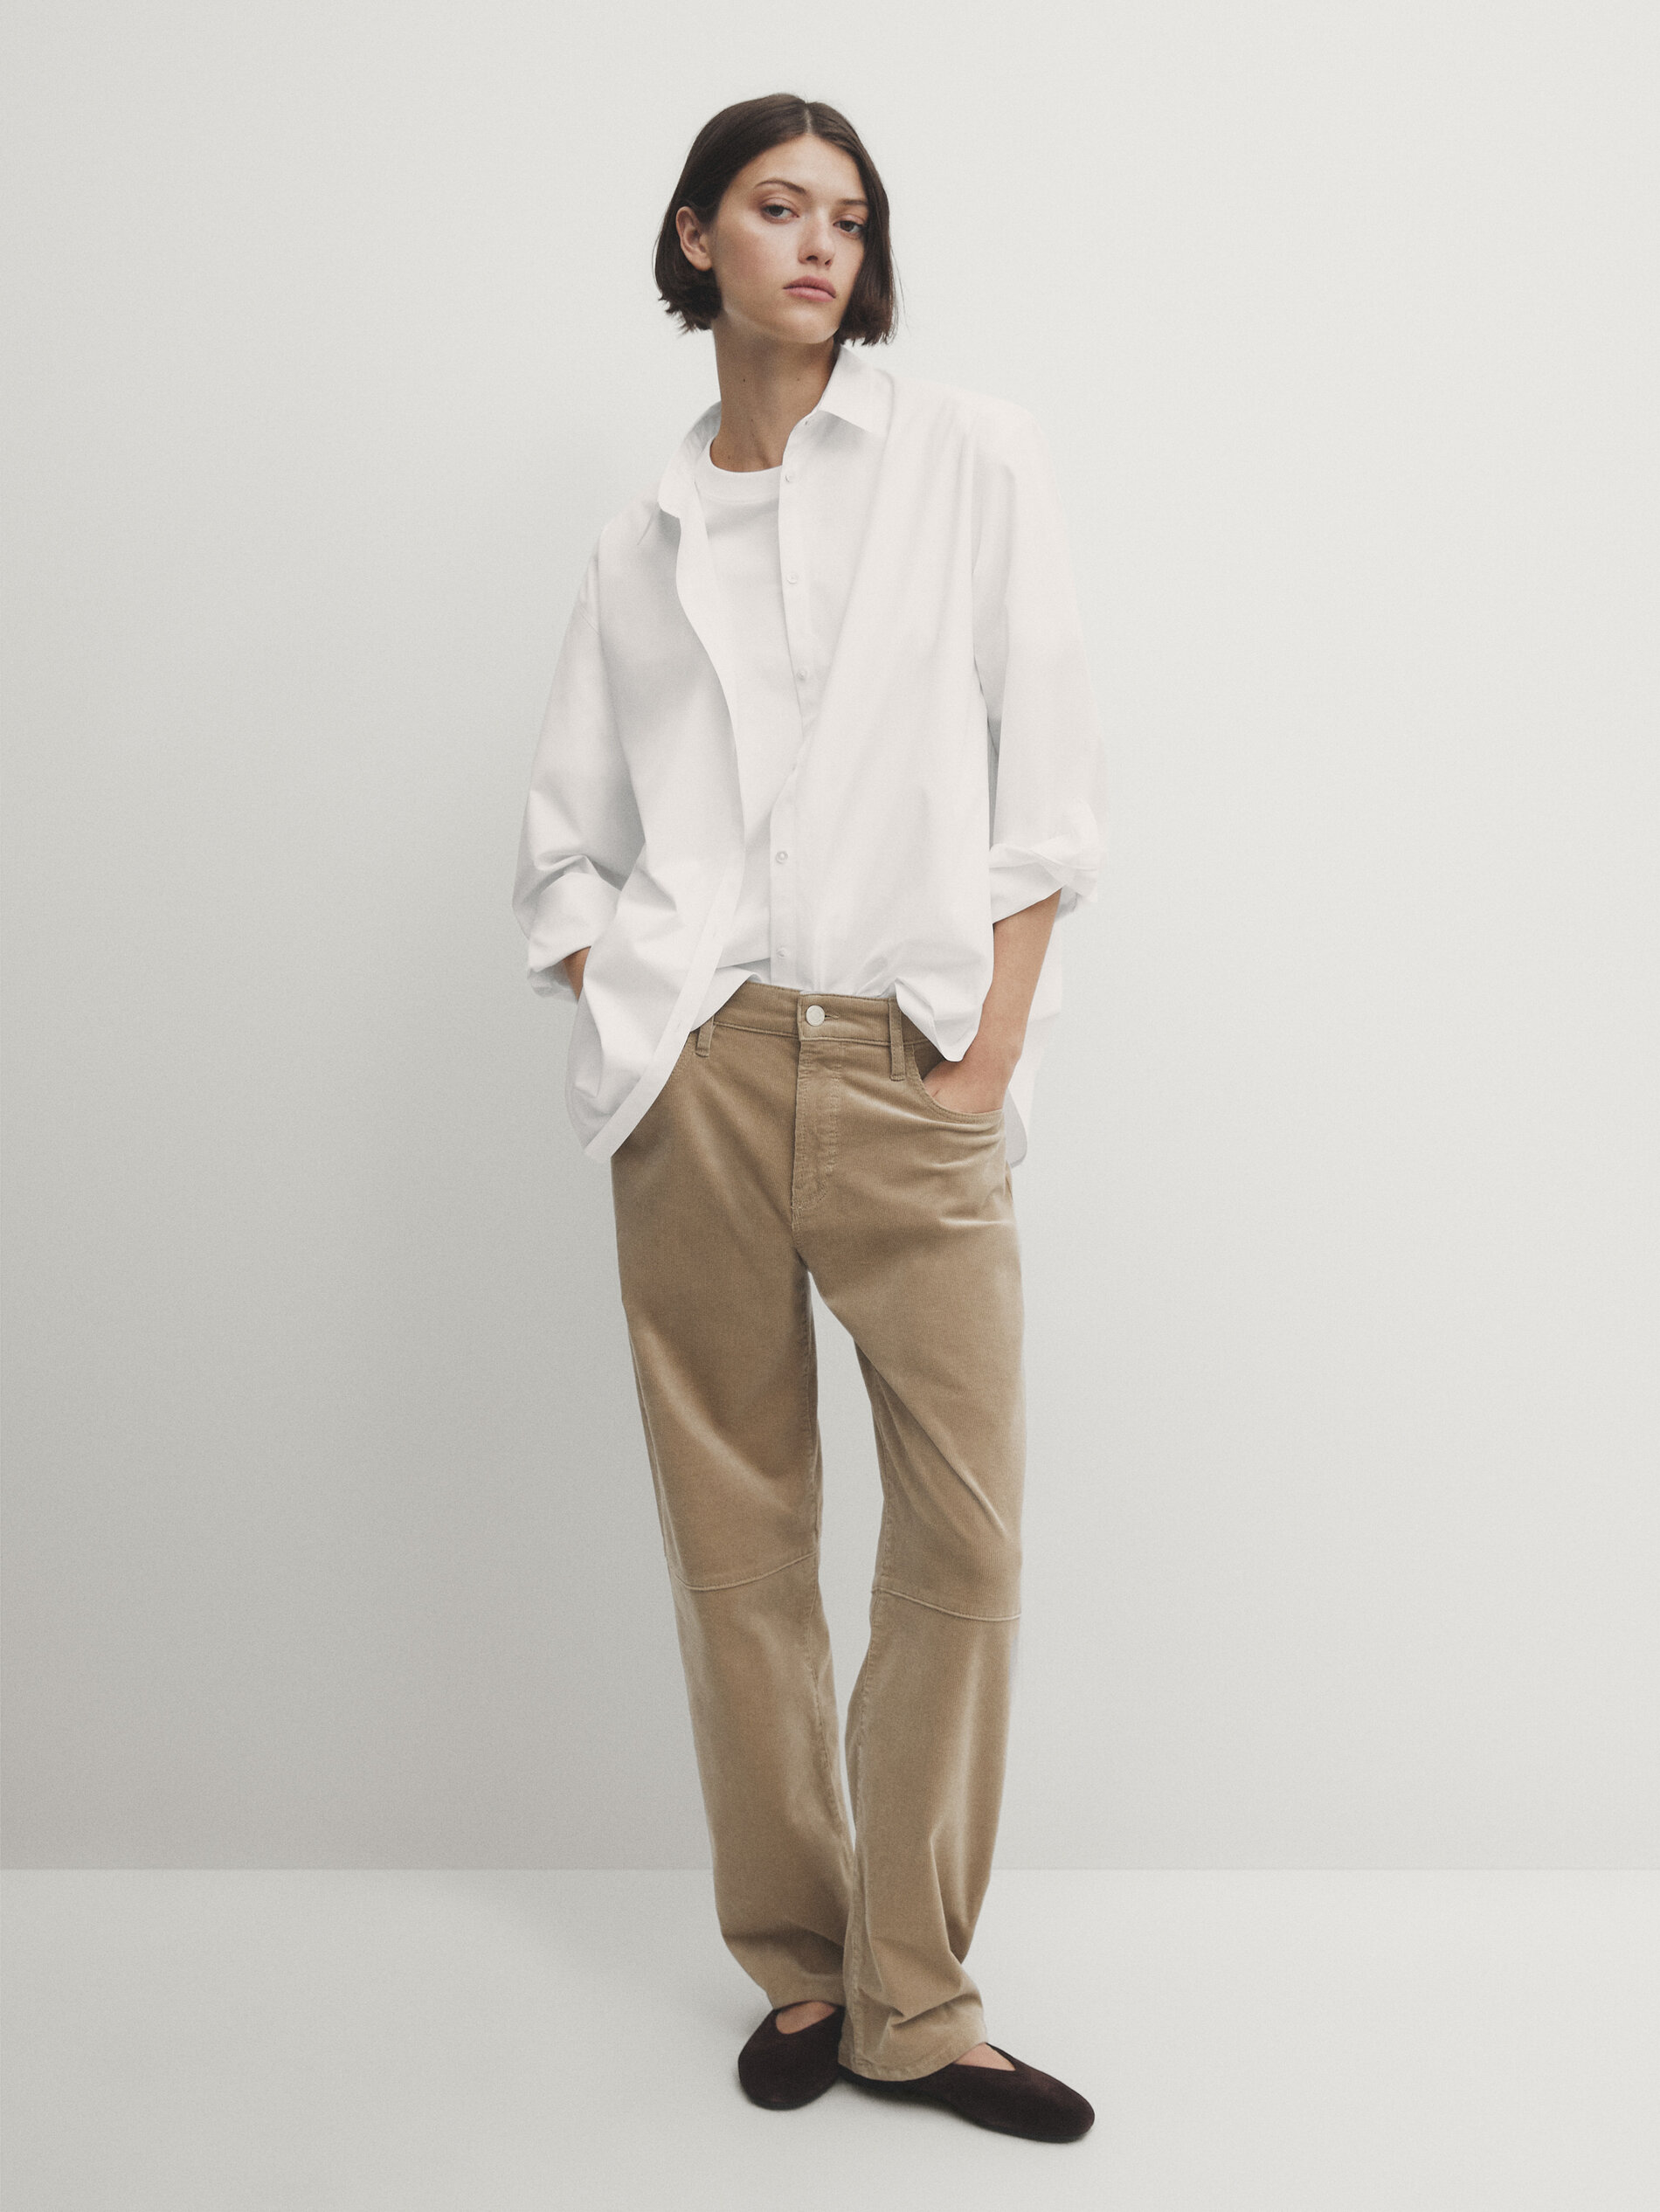 Massimo Dutti Limited Edition Collection of Chic, Elevated Basics Is Worth  a Look — Anne of Carversville